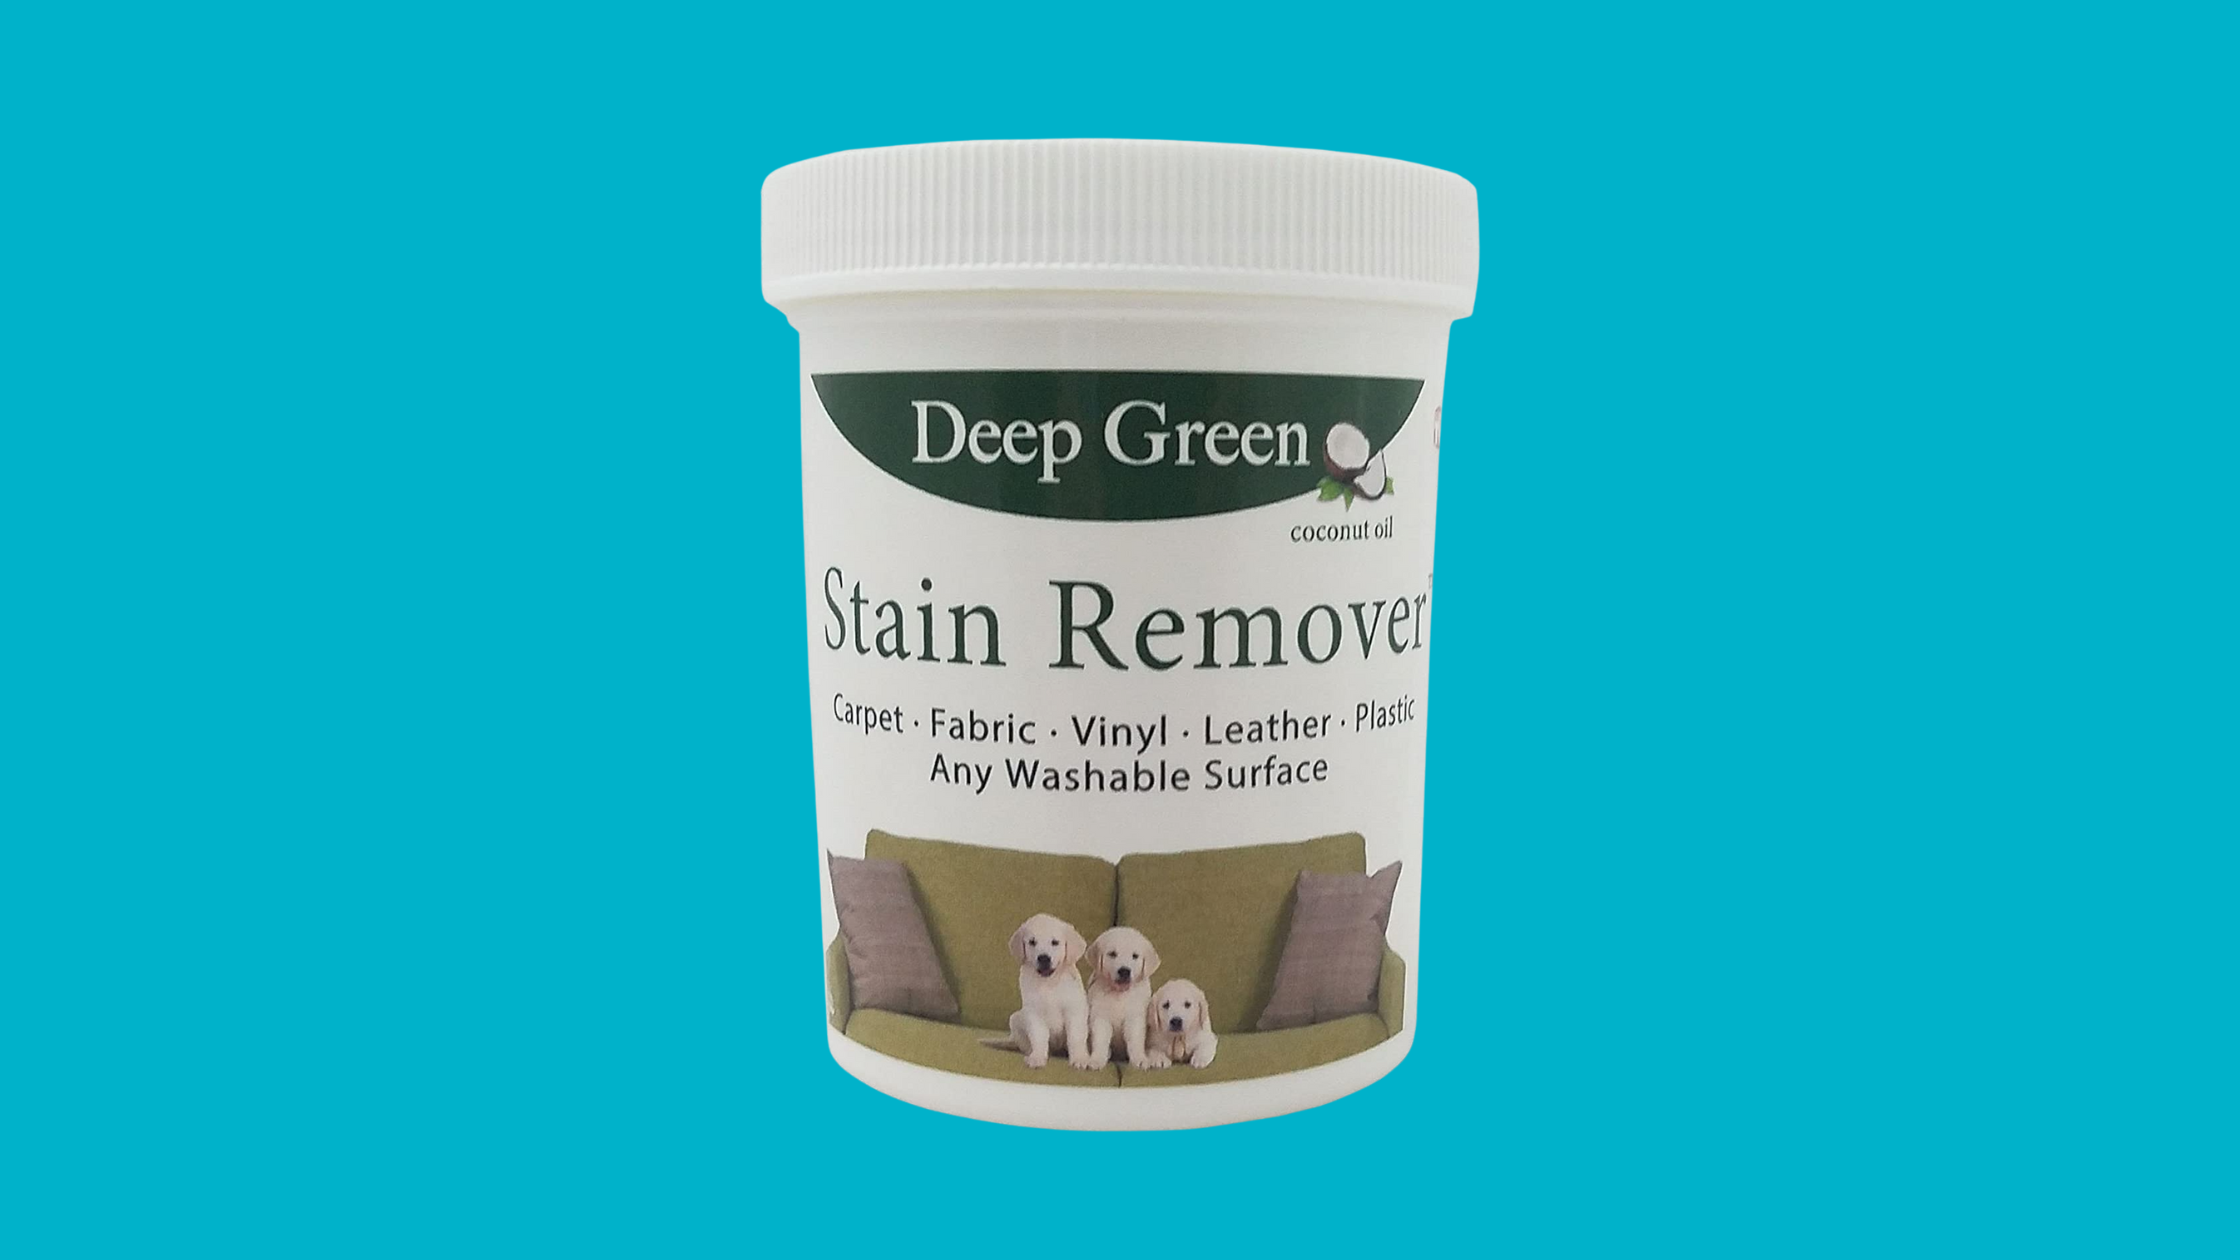 Deep Green Stain Remover